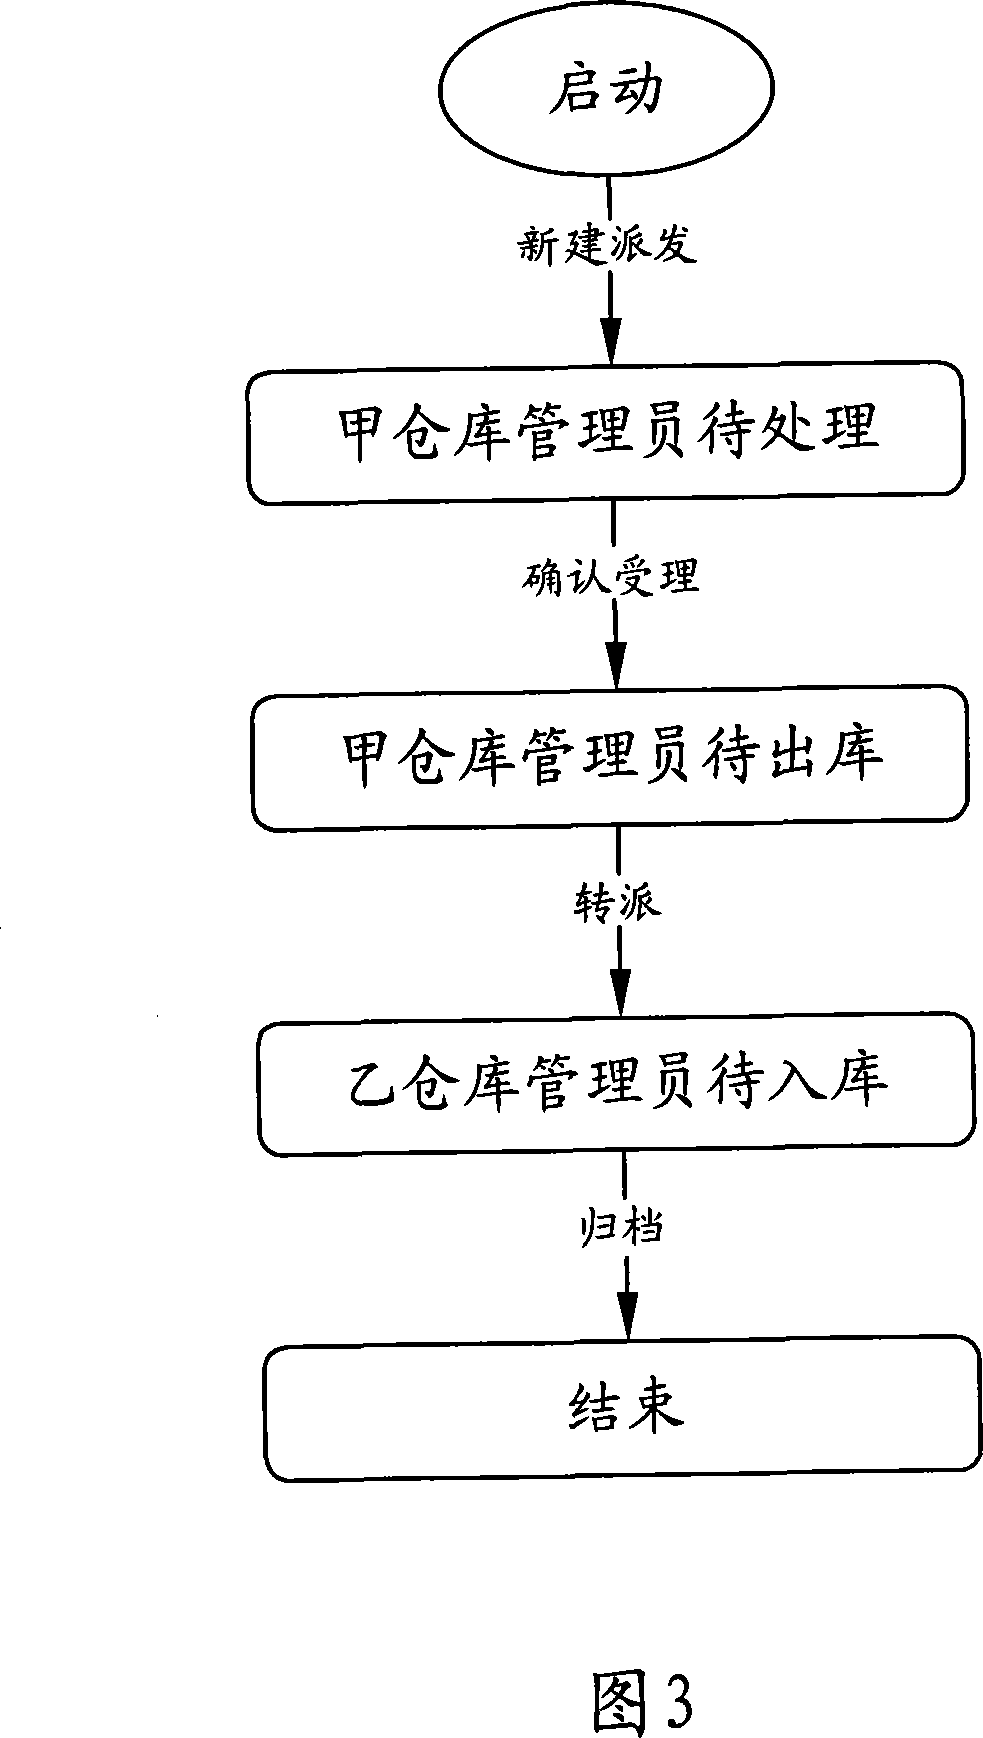 System for managing network element board resources